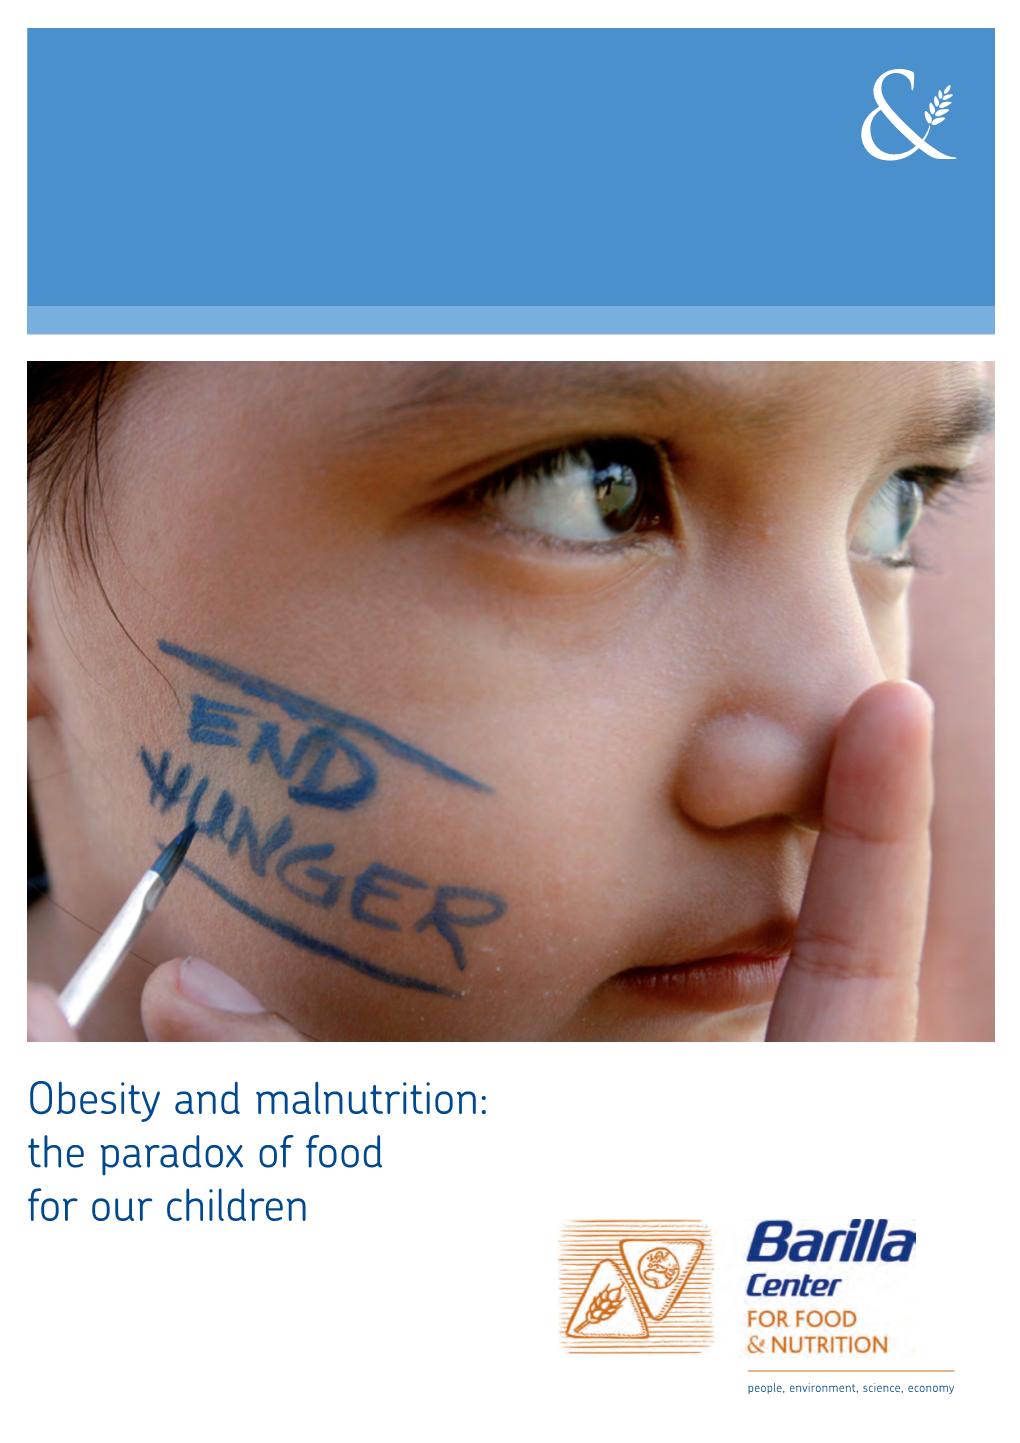 Obesity and Malnutrition: the Paradox of Food for Our Children (November 2011)